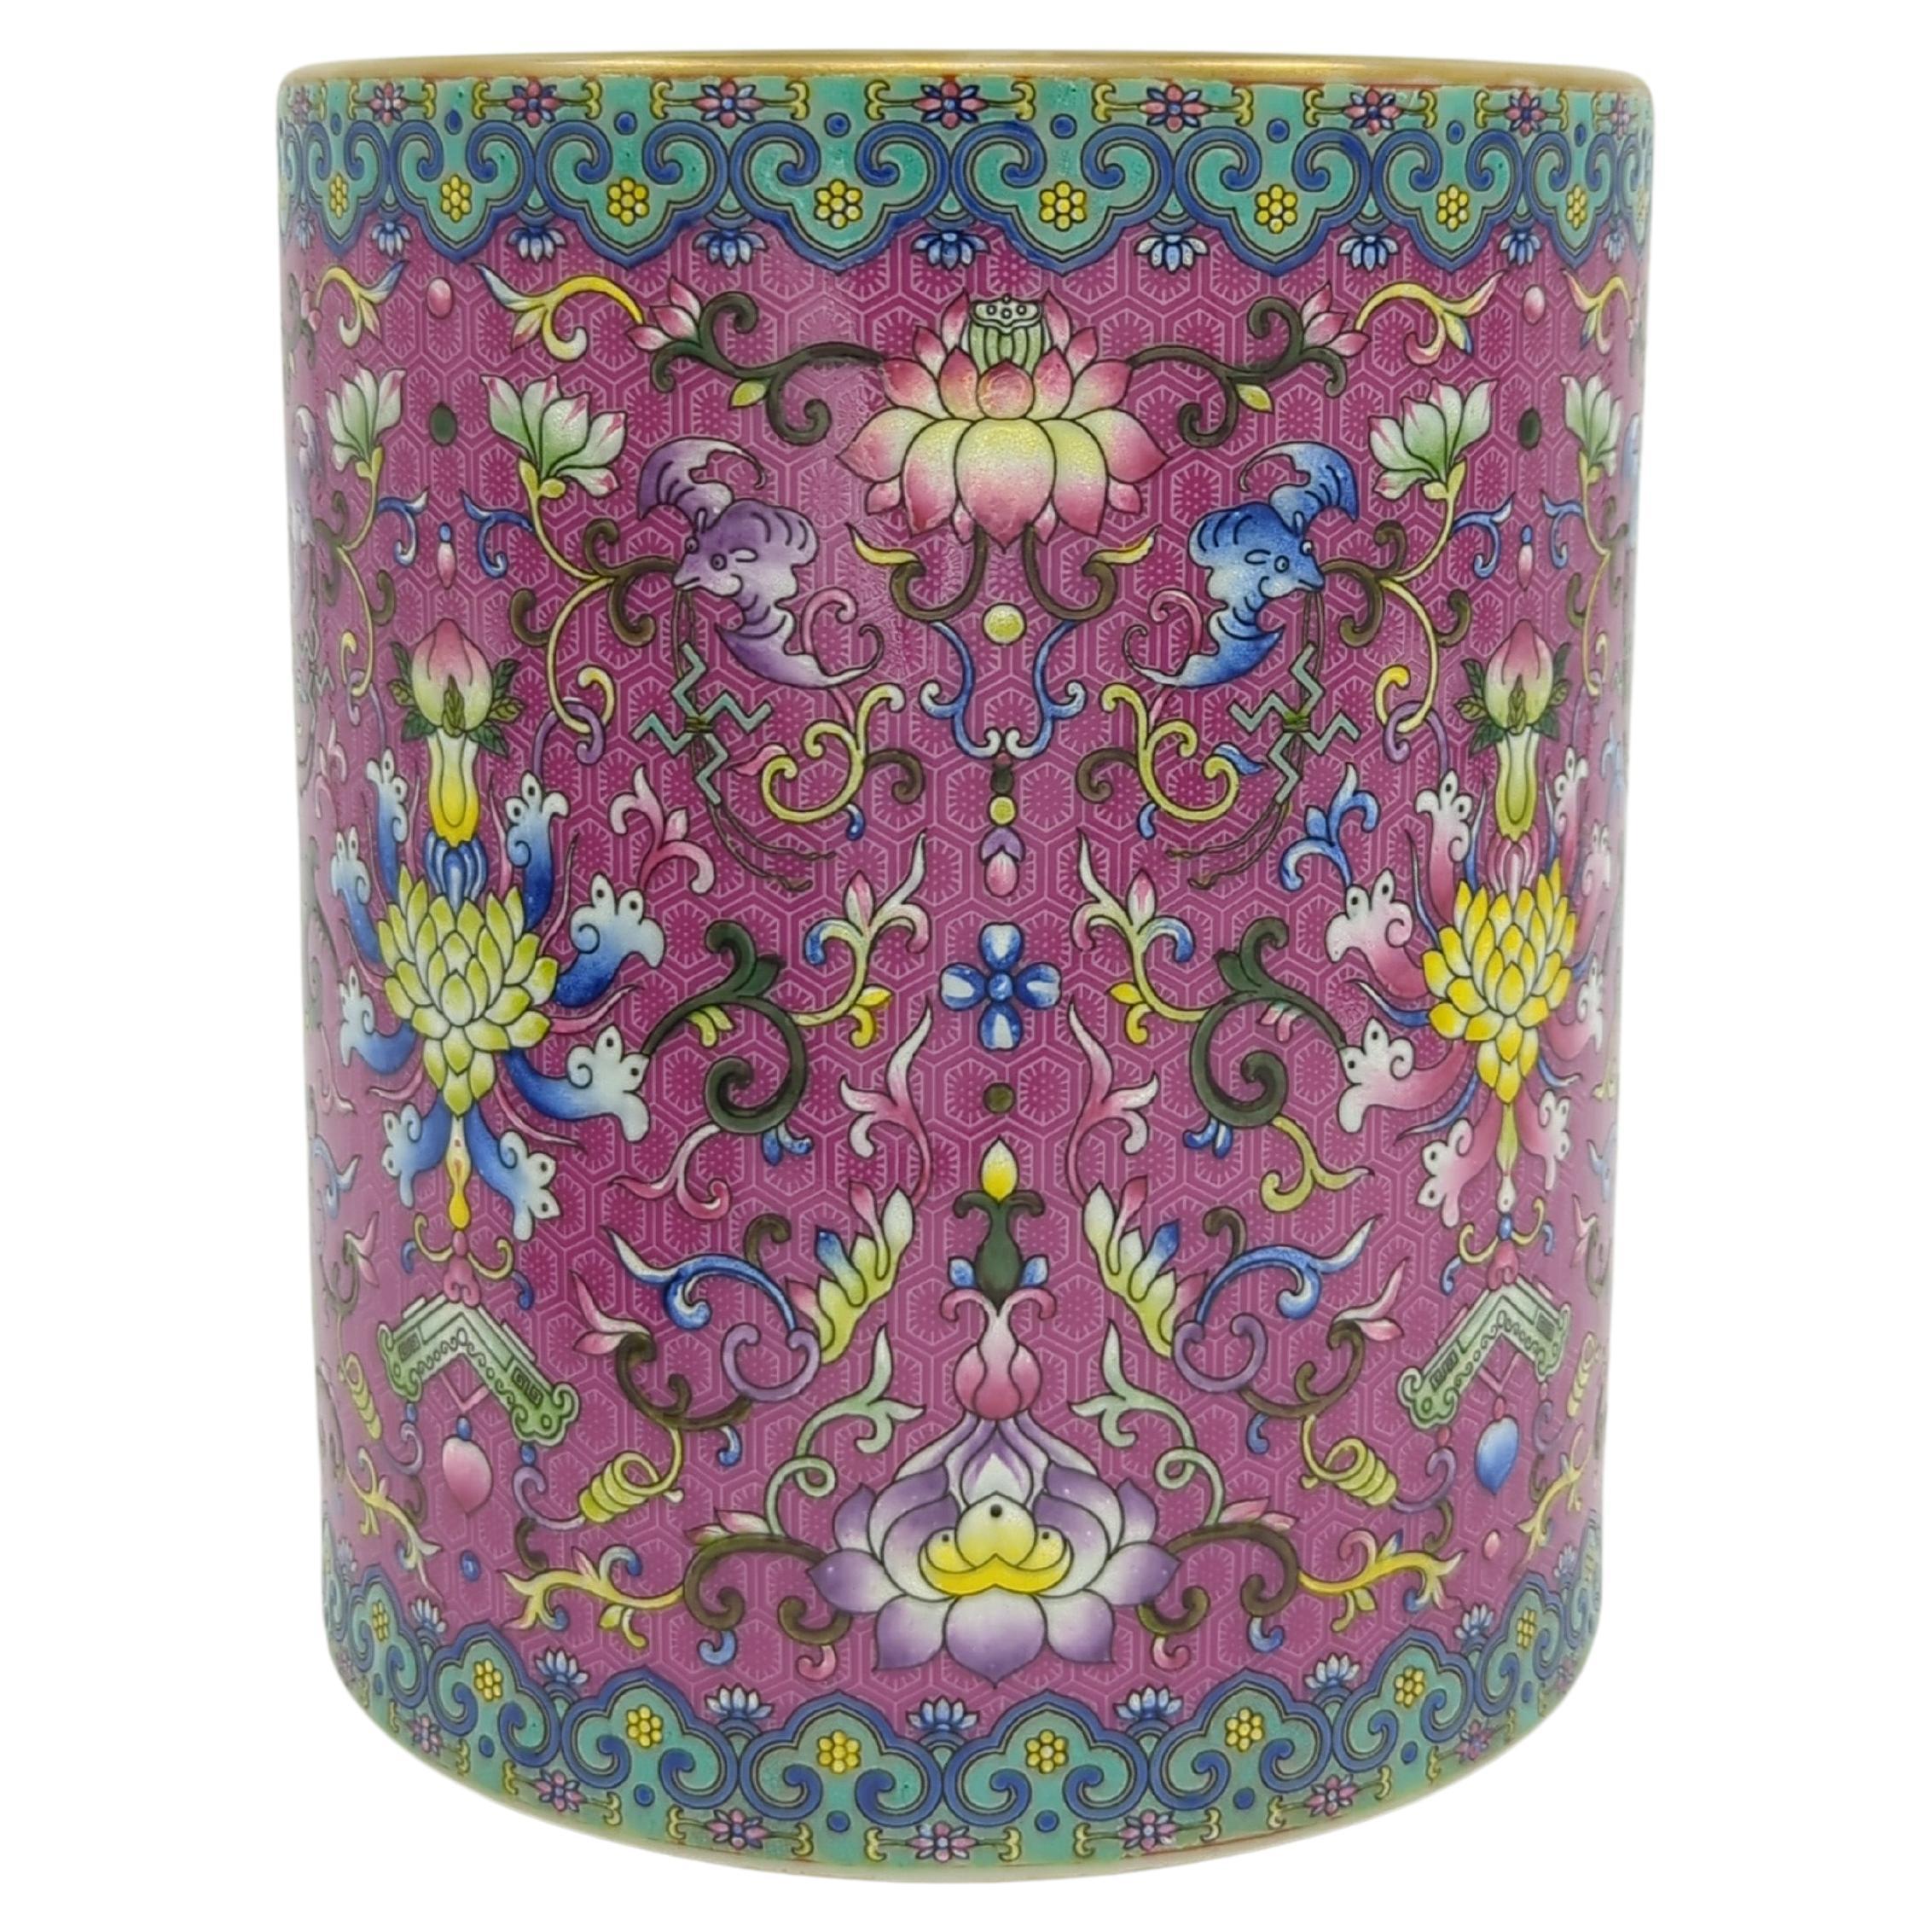 This exceptional bitong brush pot is a masterwork in Chinese decorative art, dating back to the late 20th century. The piece is enveloped in an imperial purple ground, accentuated by sgraffito hexagonal seeded cell pattern that adds both texture and